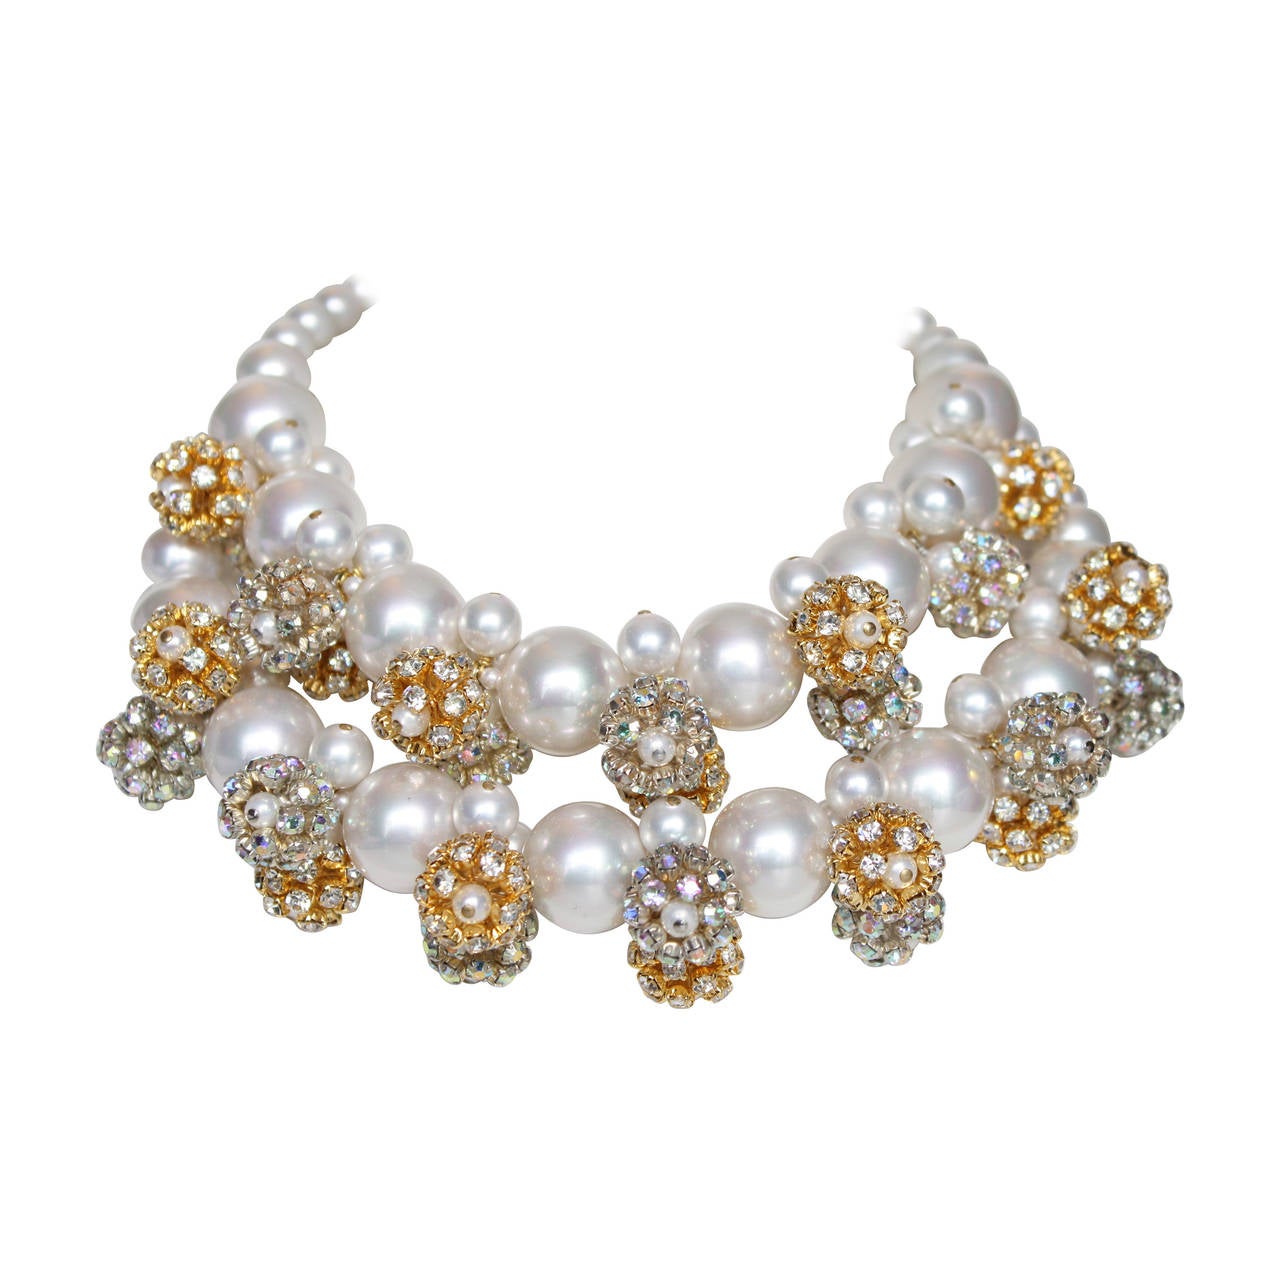 Francoise Montague Glass Pearl and Swarovski Crystal Ball Statement Necklace